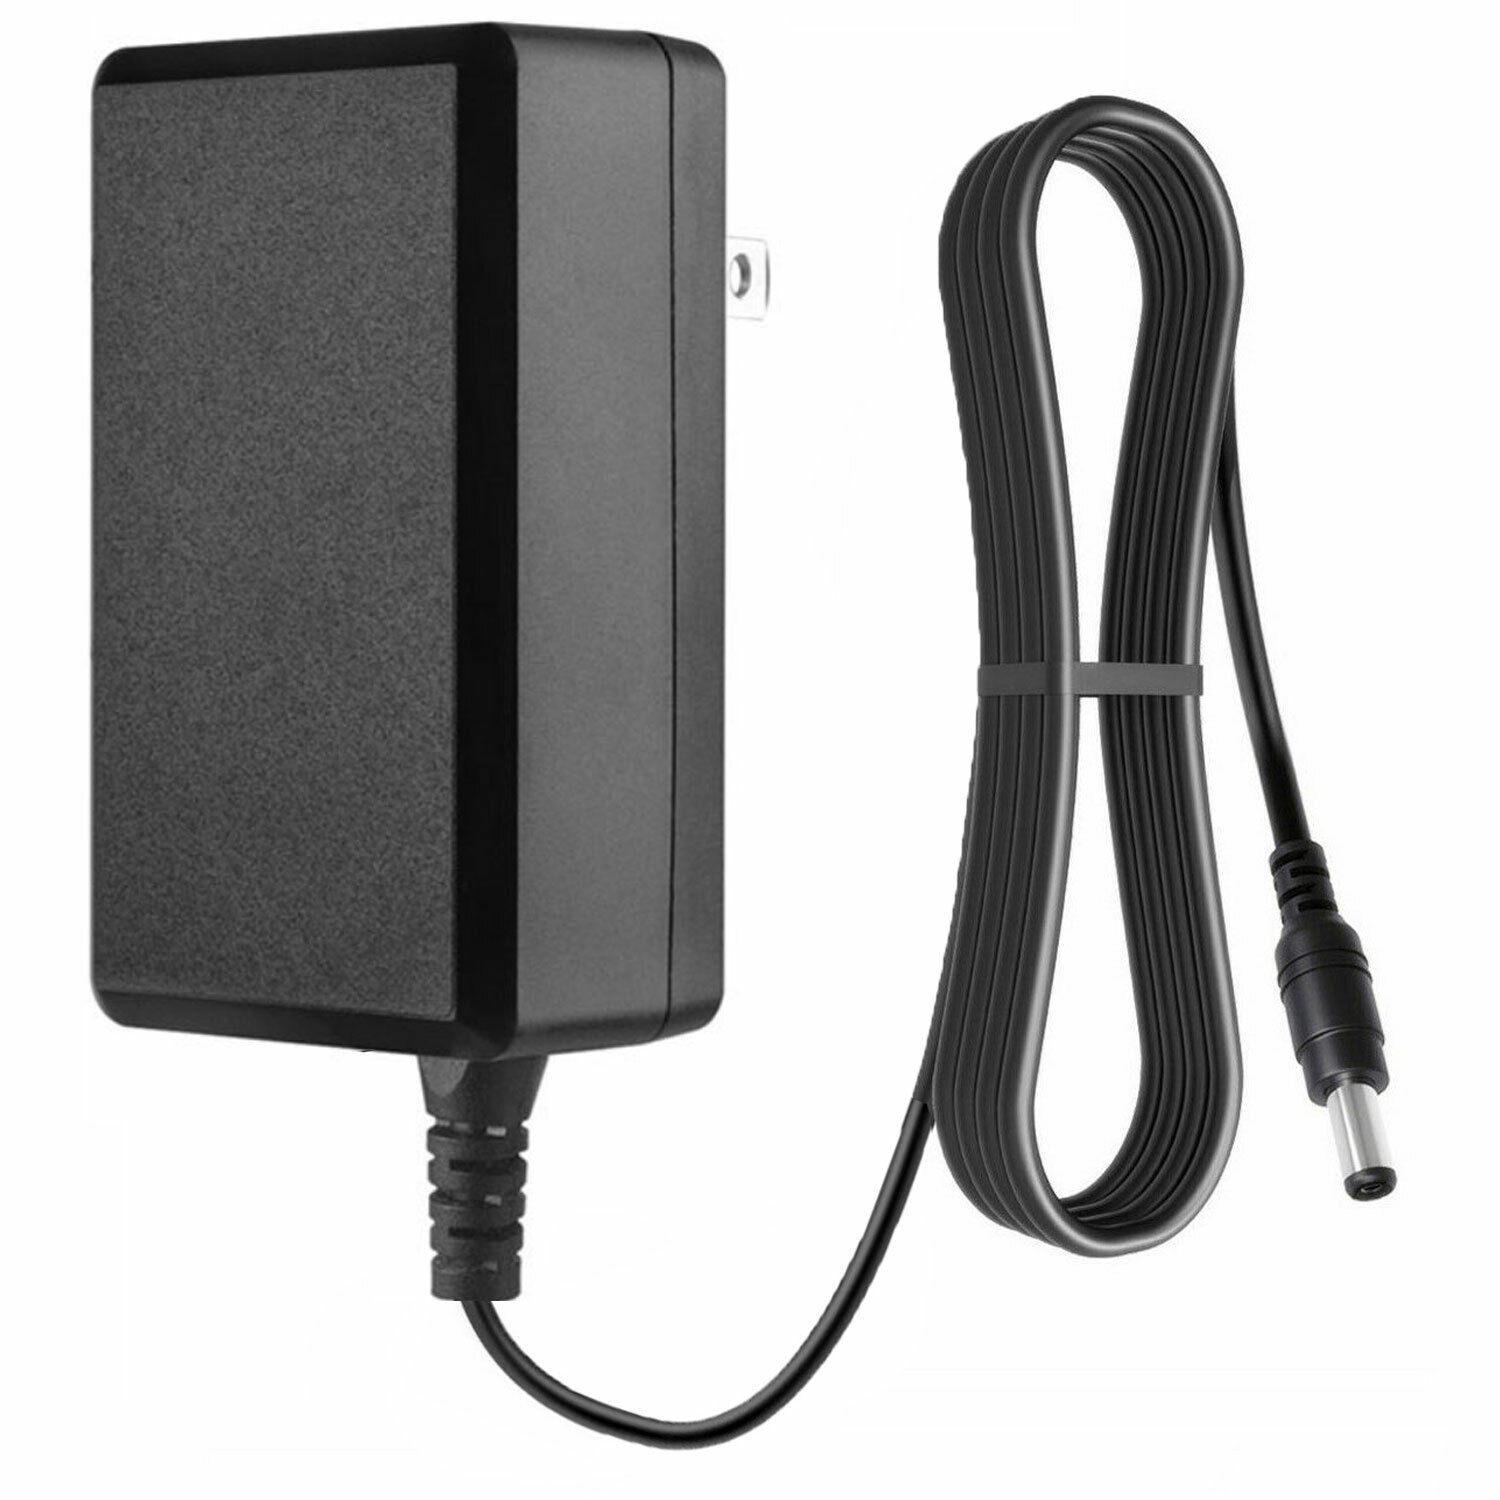 *Brand NEW* For PHOENIX DC 24V Massage Gun Percussion Massager Power Supply Cord AC Adapter